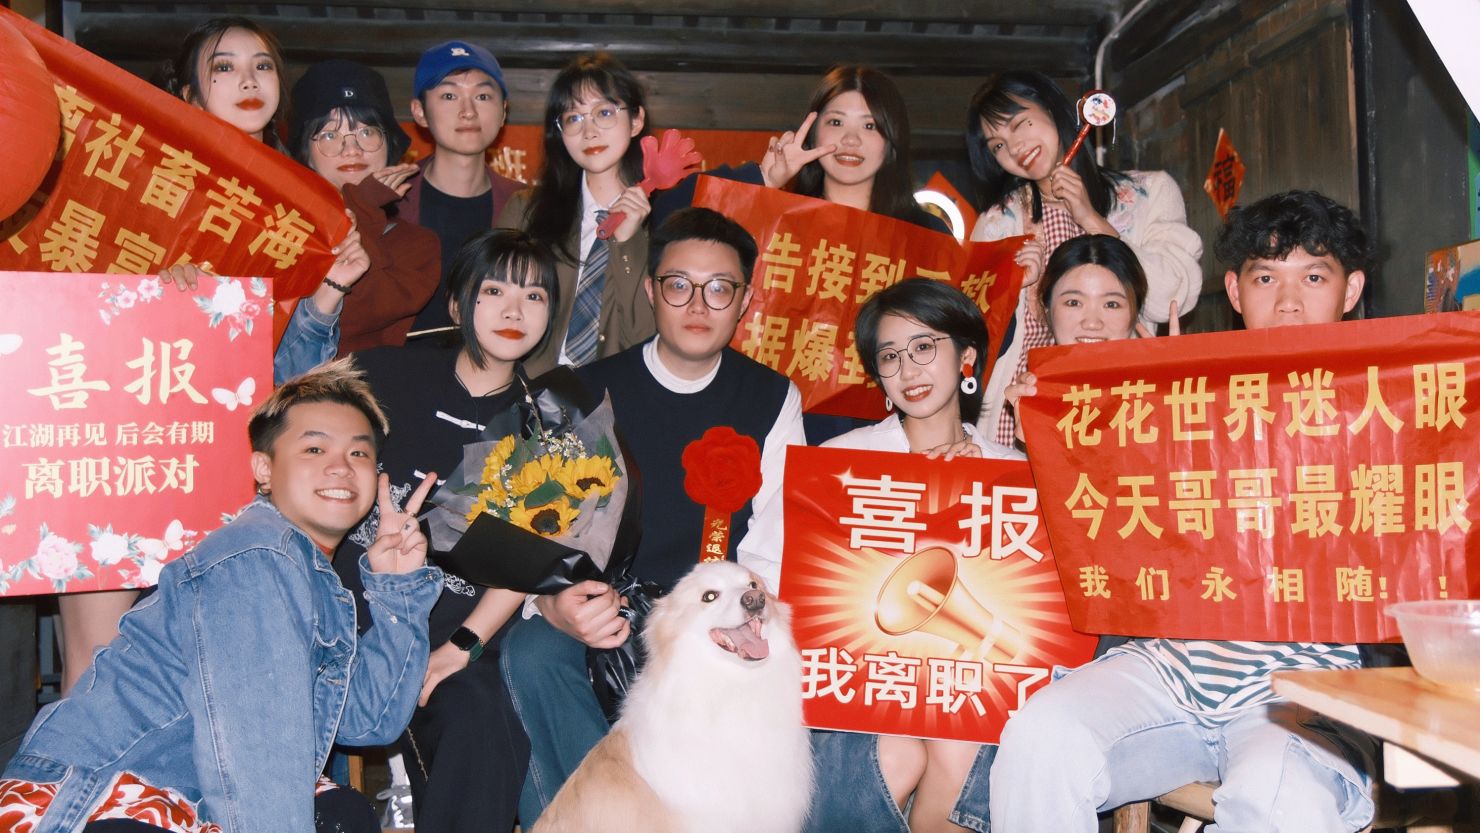 Liang (center) and his friends threw a resignation party in May after quitting their jobs.